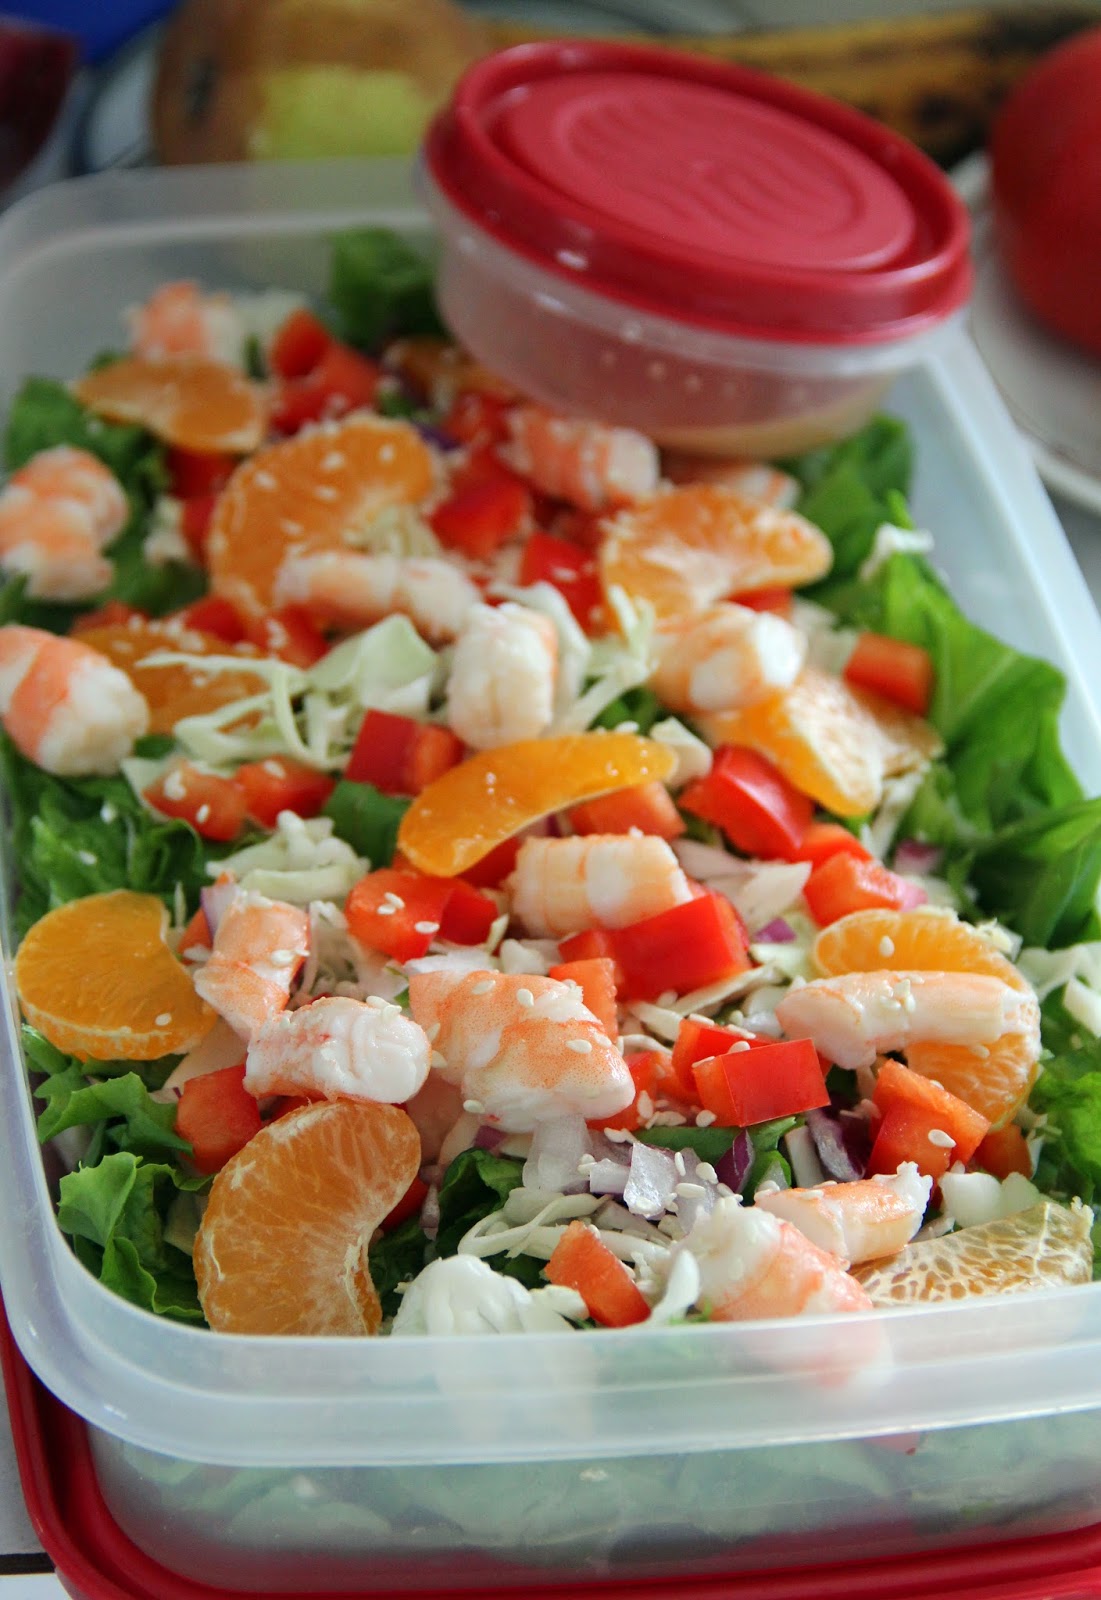 Jo and Sue: Asian Inspired Prawn Salad With Sesame Dressing